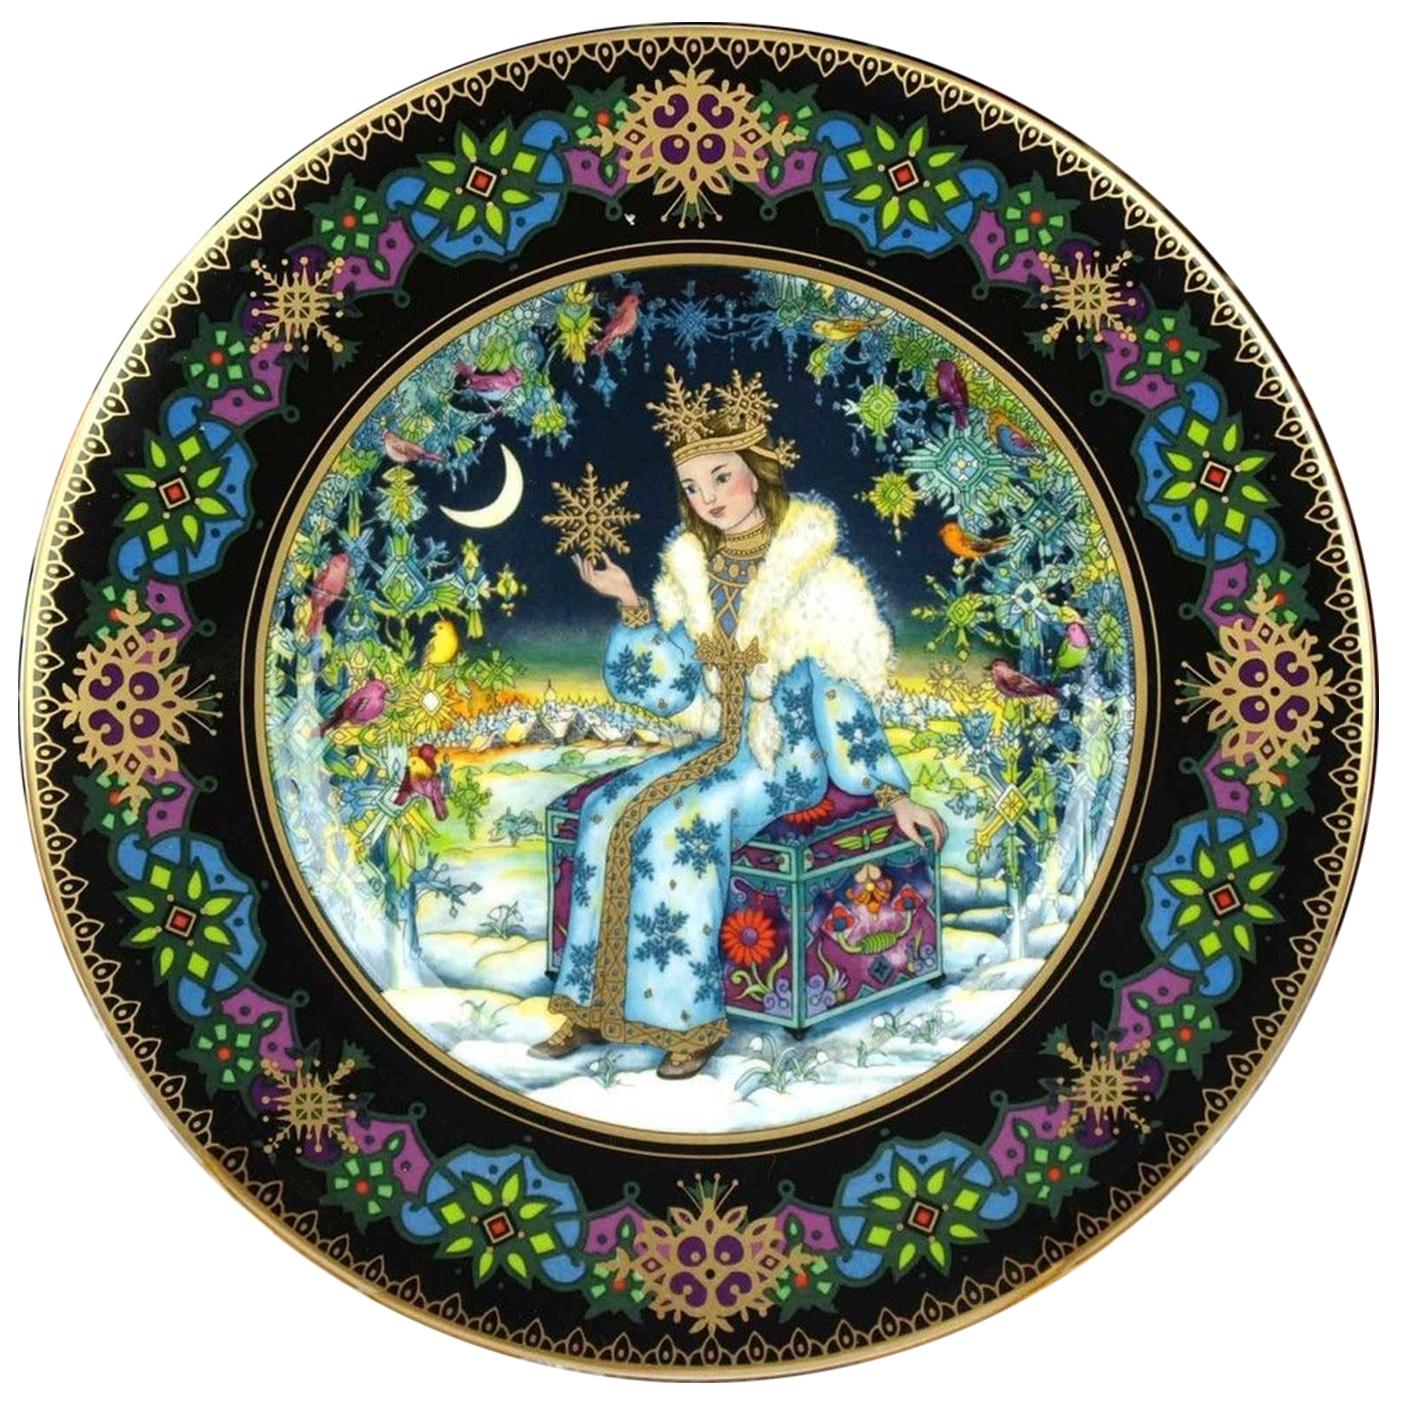 Stunning a rare Villeroy & Boch limited edition collector’s plates from Heinrich Porsellan illustrated by Gere Frauth.

The size of each plates is 8-1/2